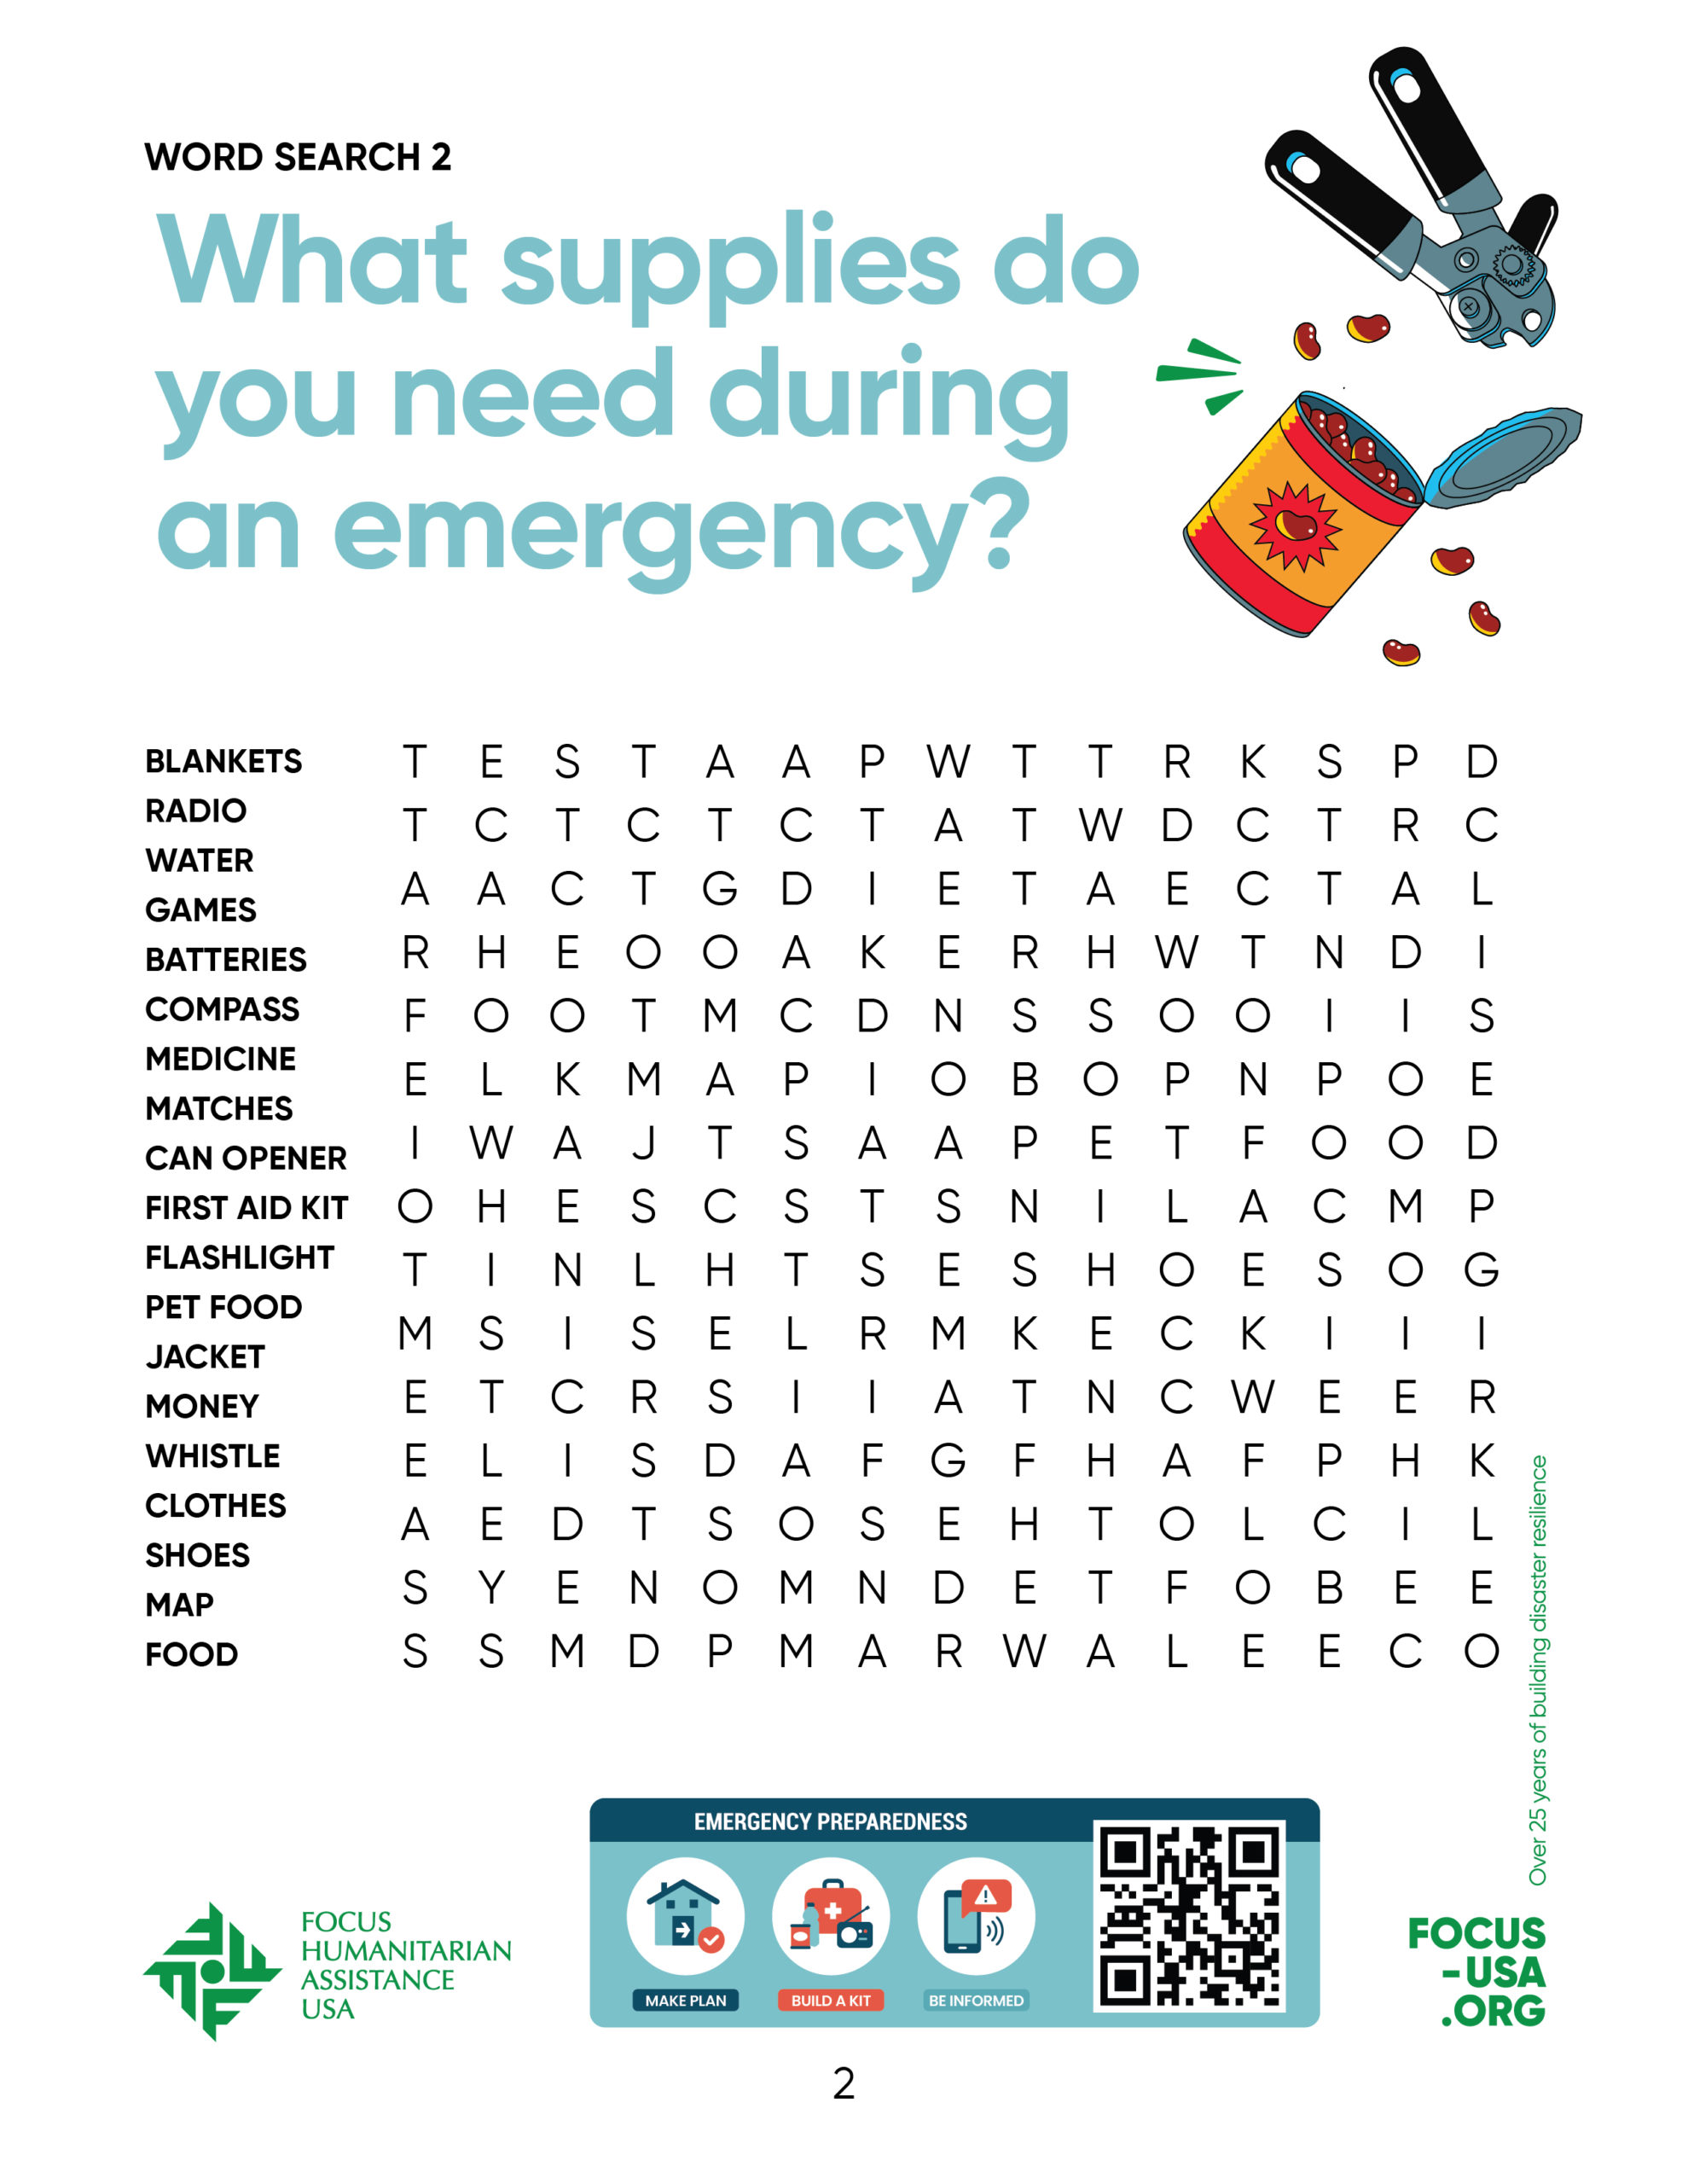 What supplies do you need during and emergency?